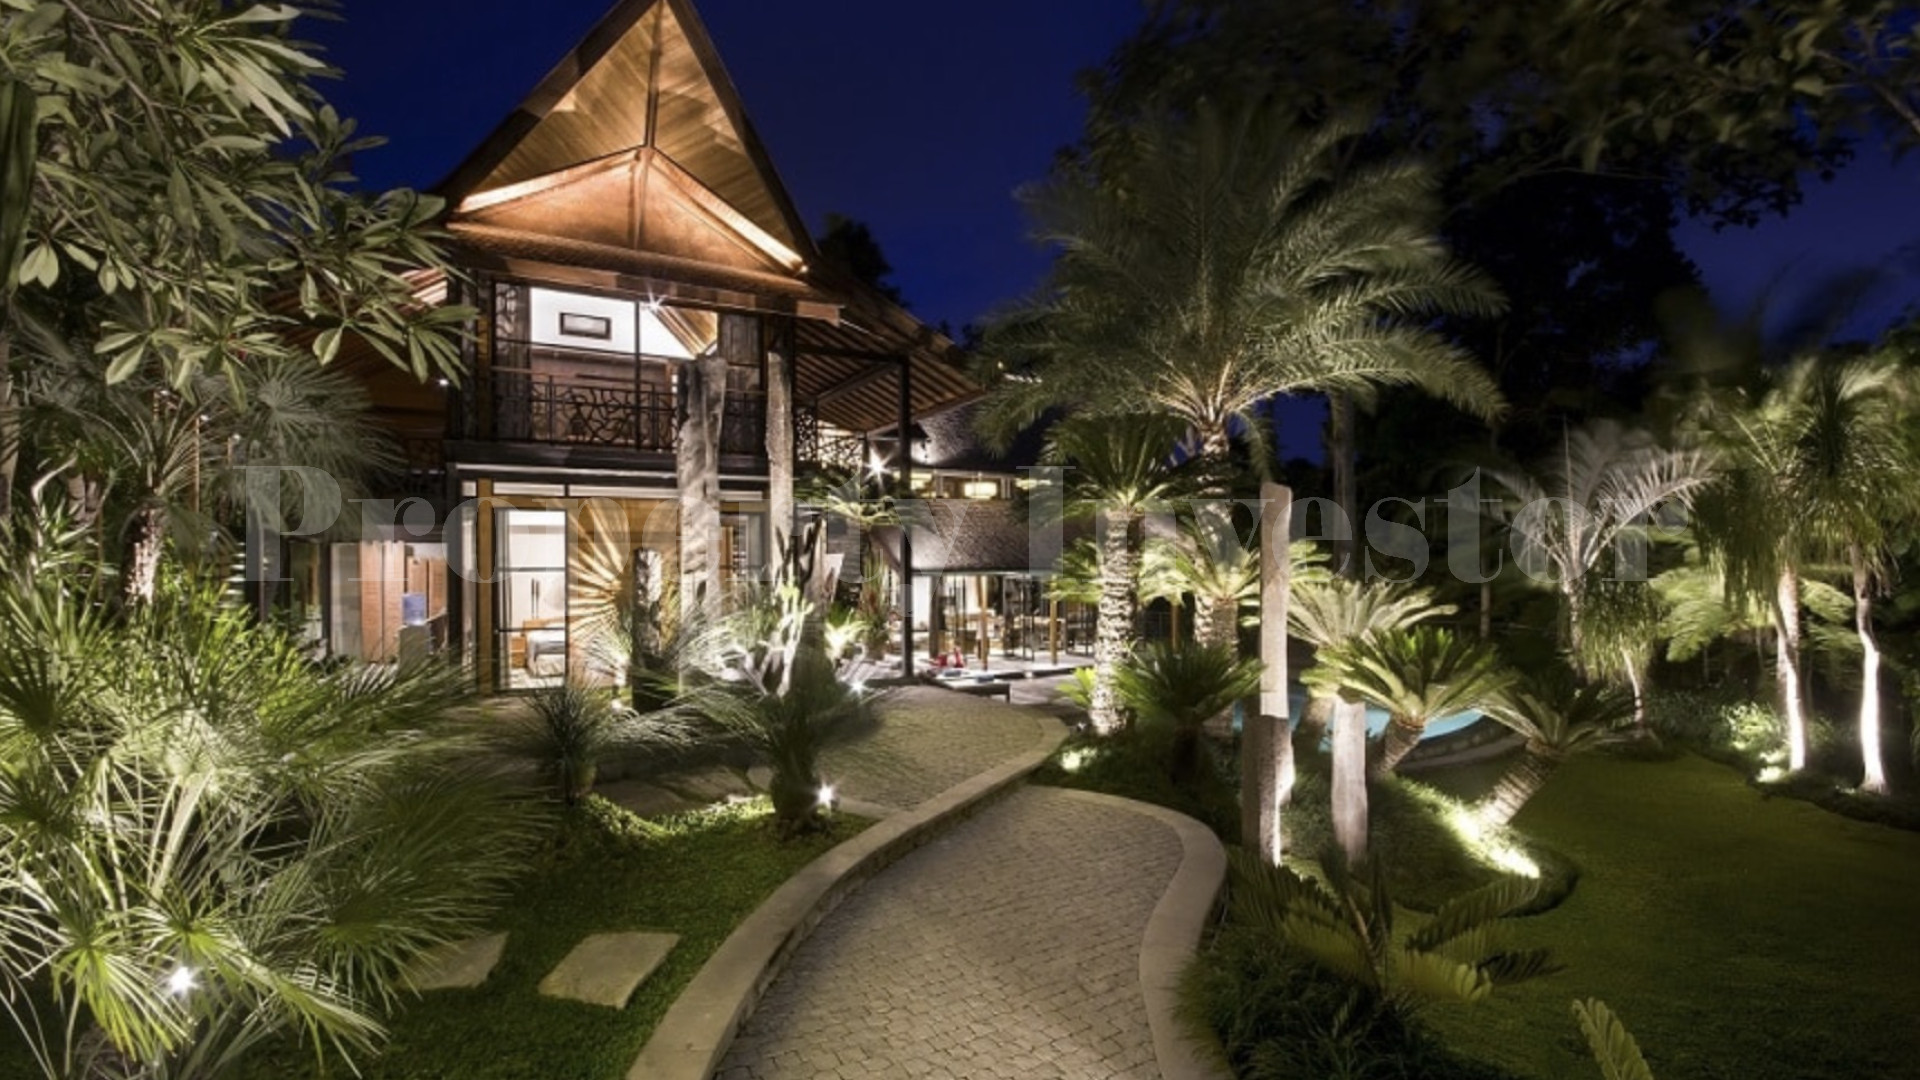 Exquisite 5 Bedroom Luxury Estate with 3 Uniquely Designed Villas & Manicured Gardens for Sale in Pererenan, Bali